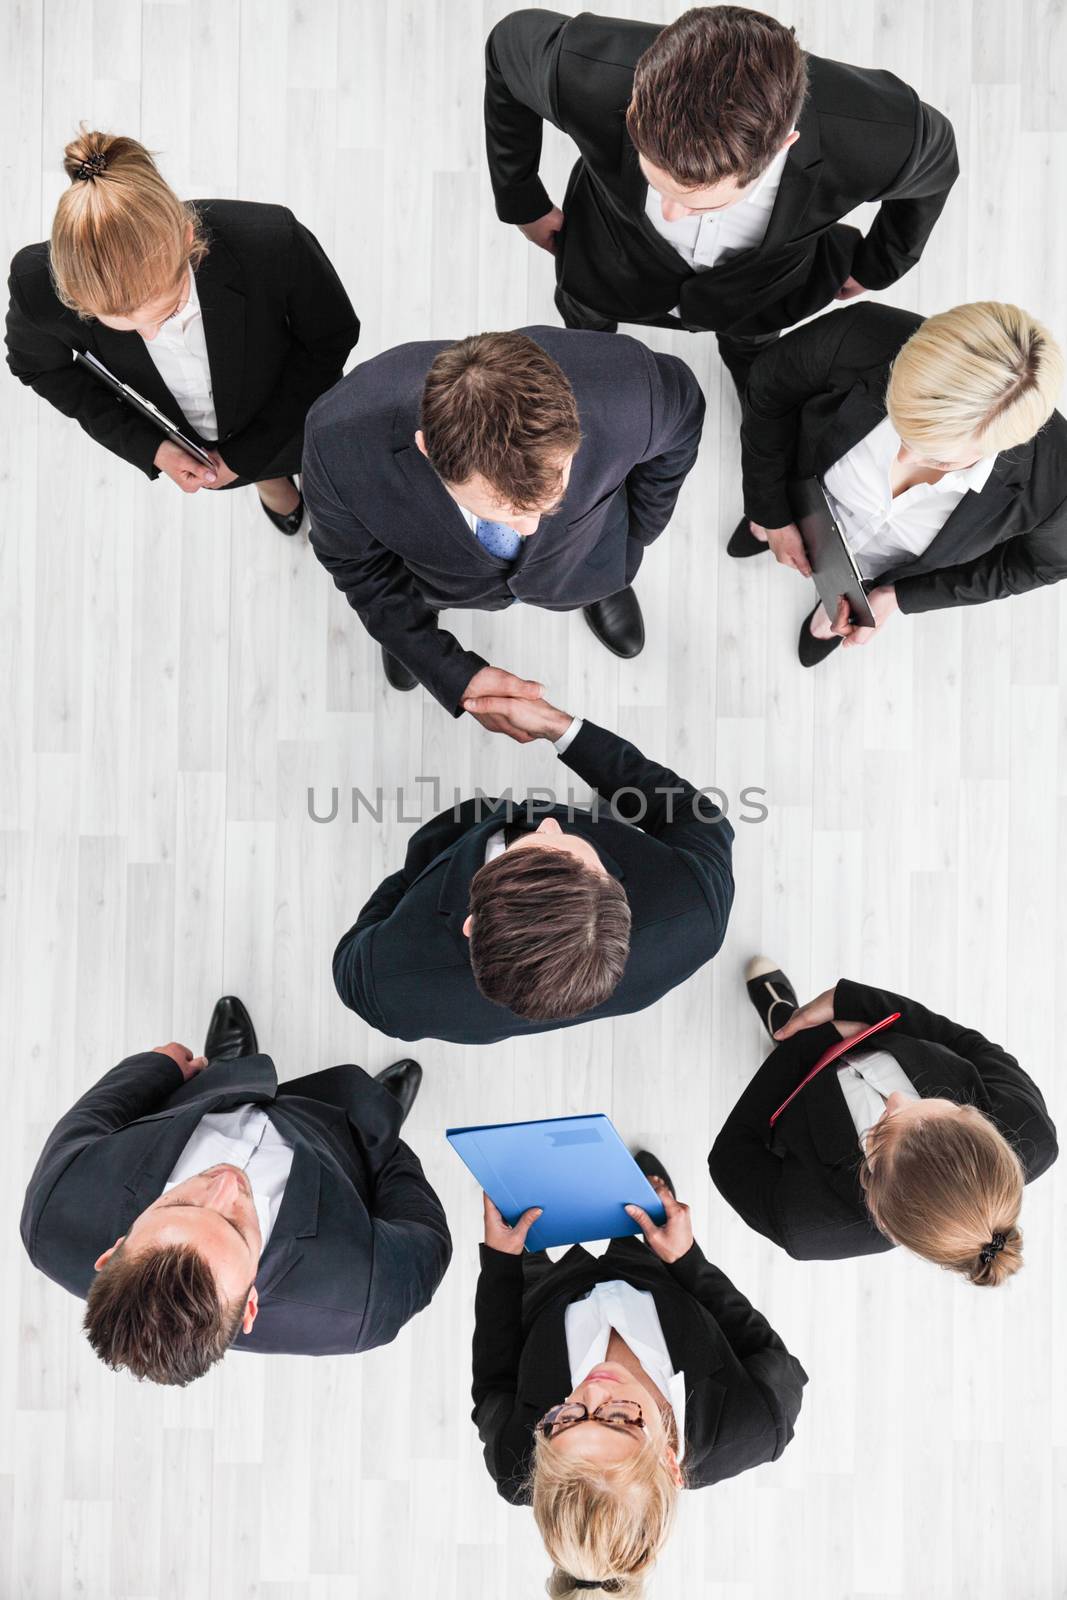 Business people shaking hands, finishing up a meeting, top view